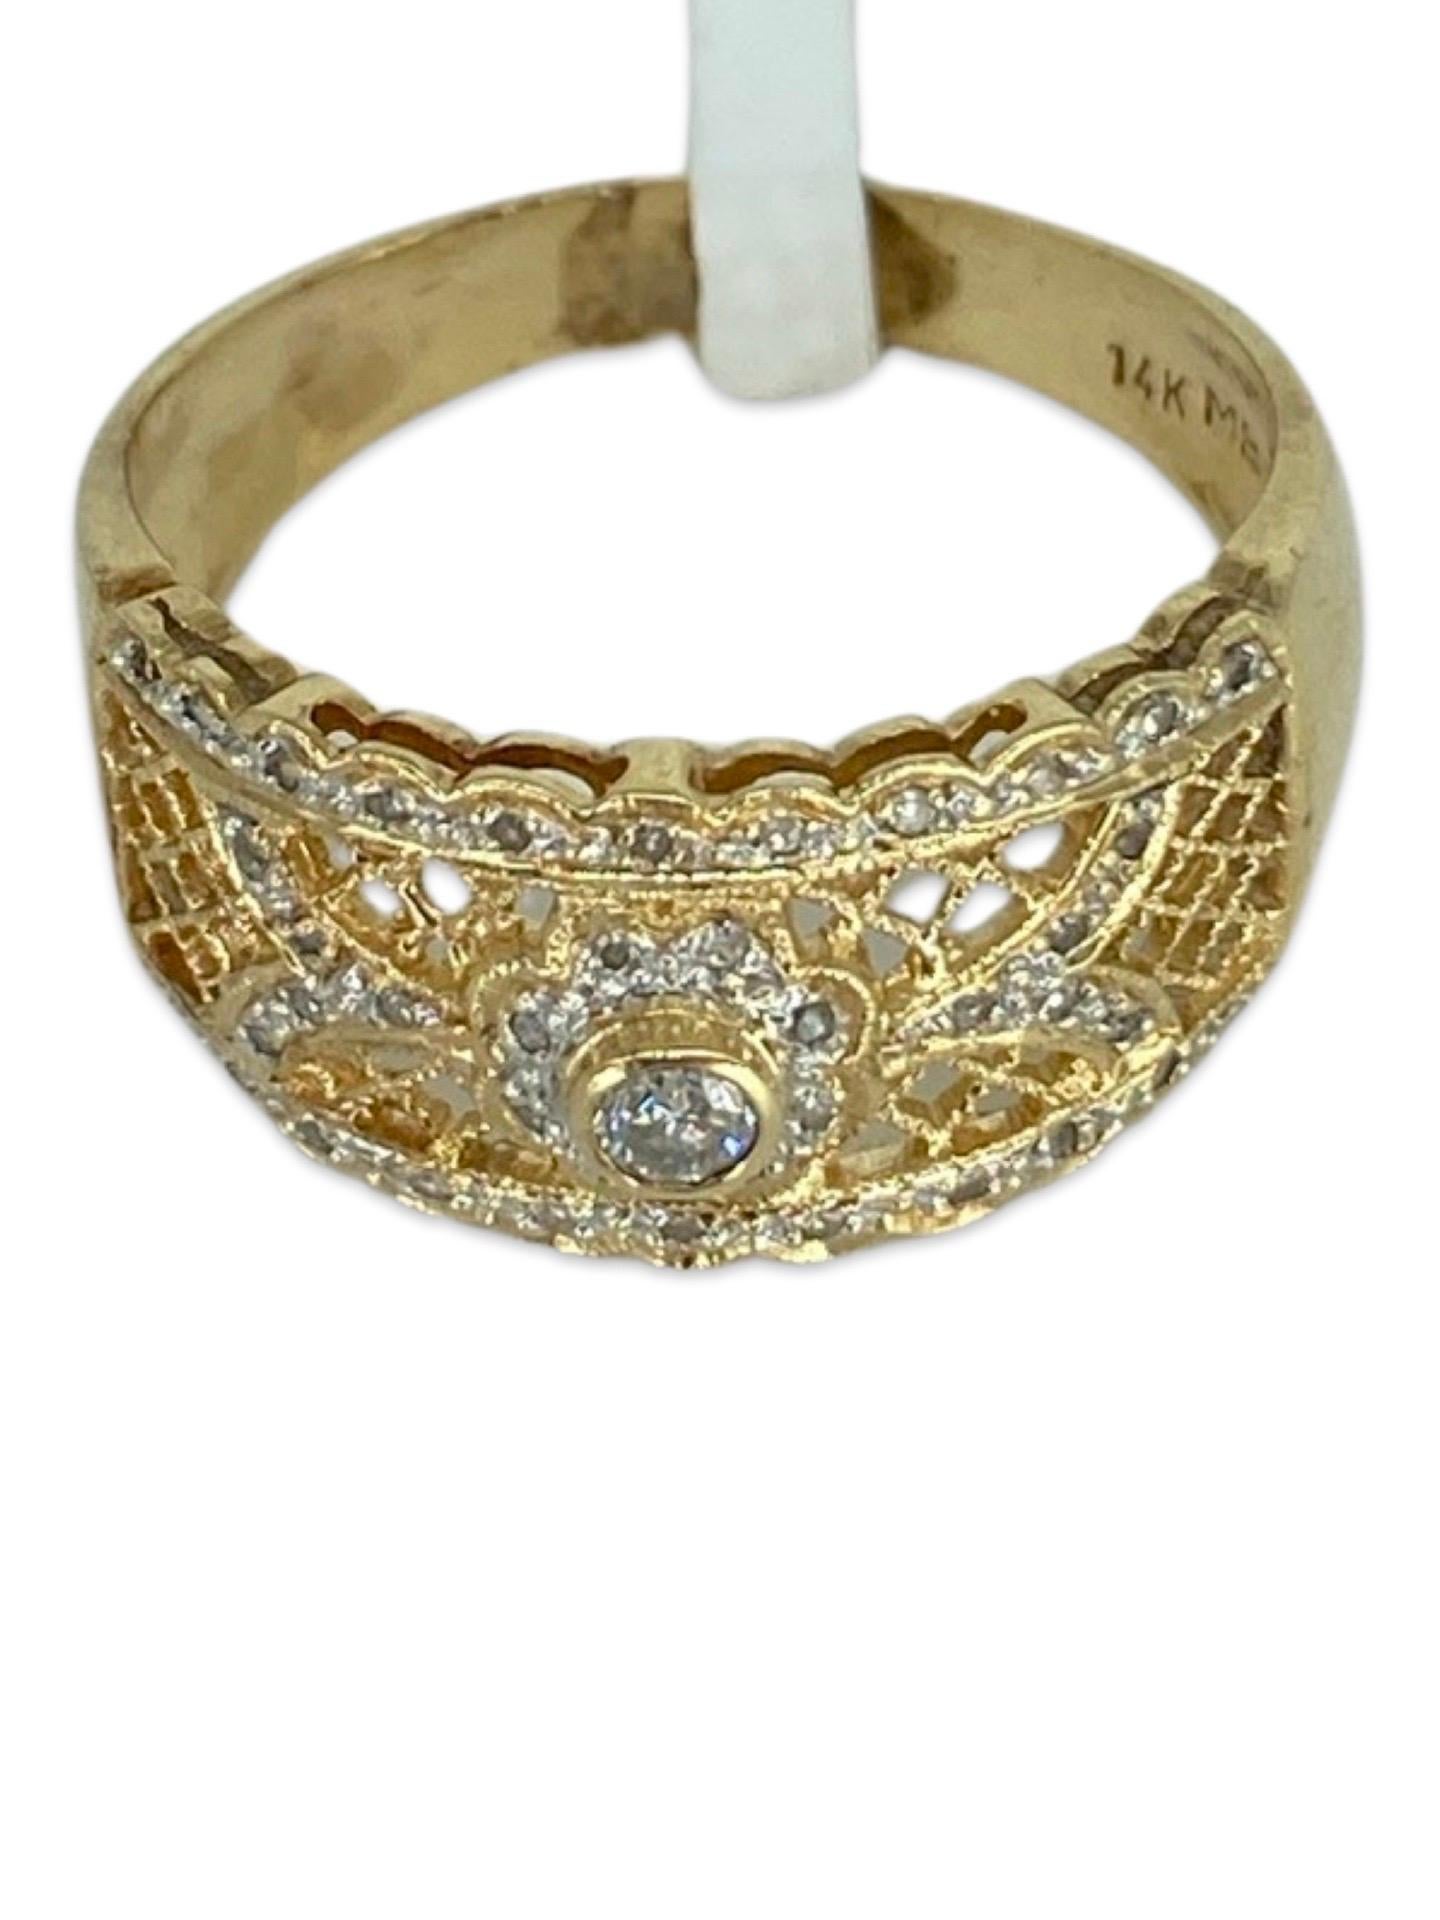 Vintage 0.50 Carat Diamonds Wide Band Ring 14k Gold  In Good Condition For Sale In Miami, FL